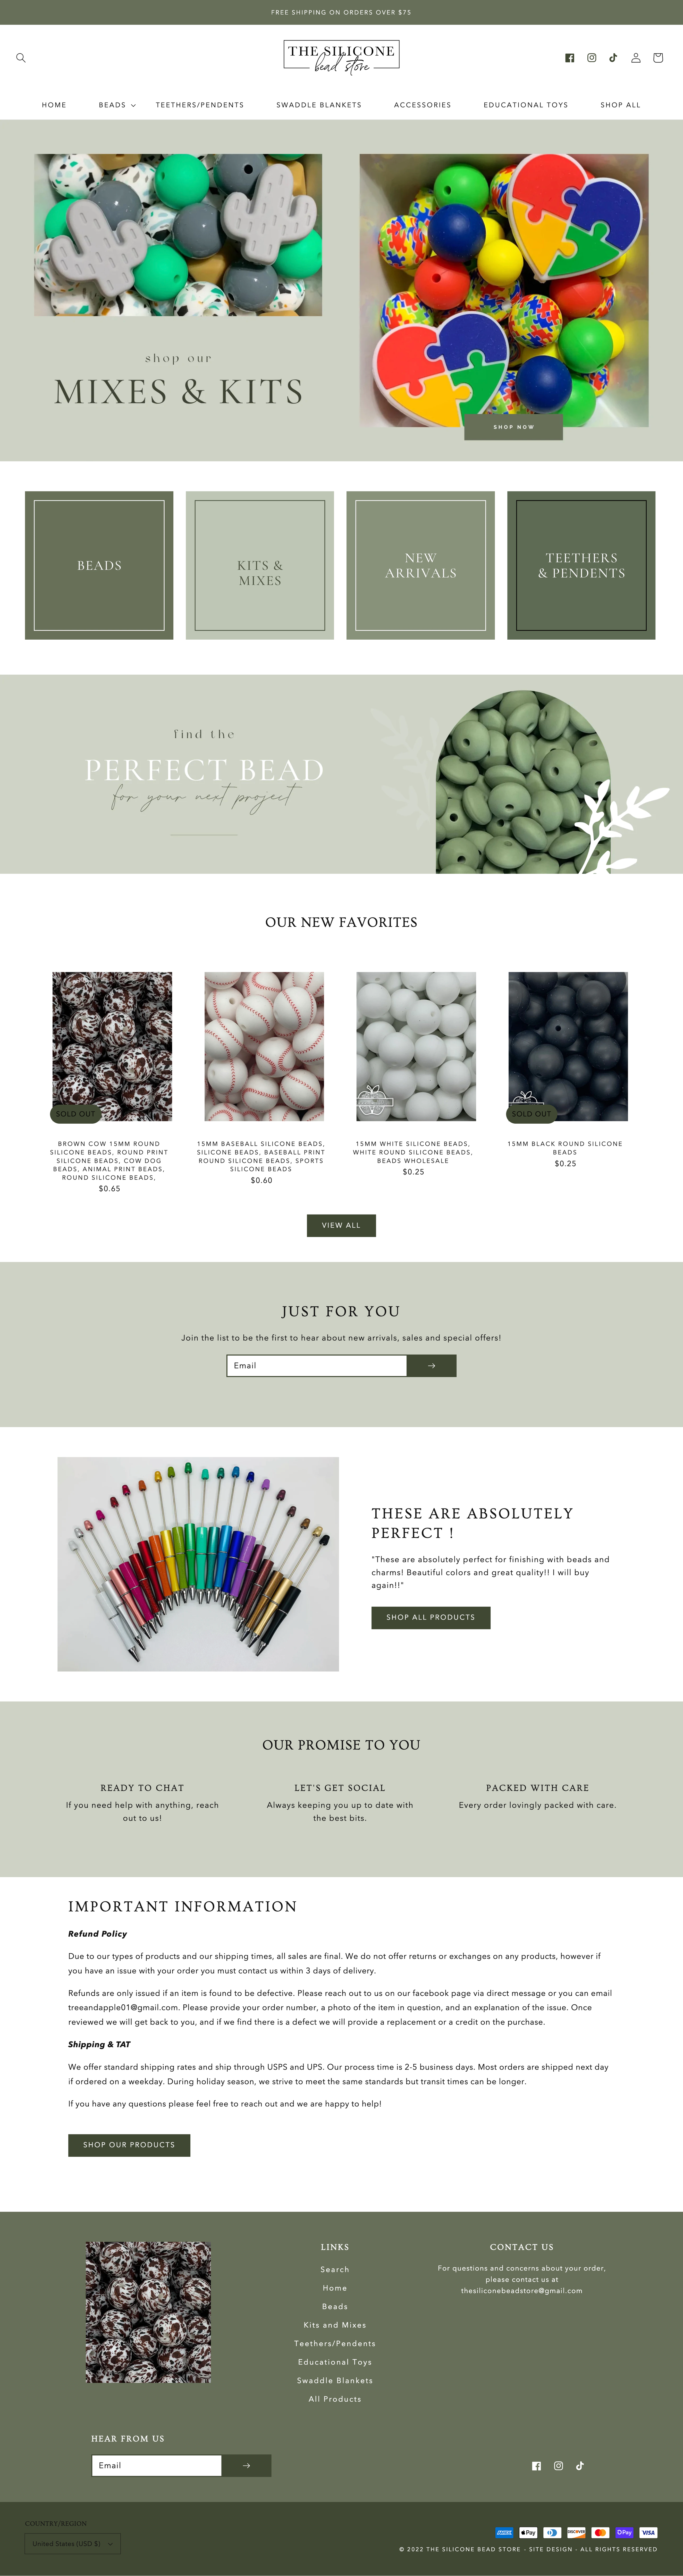 The Silicone Bead Store - Brand and Web Design Agency